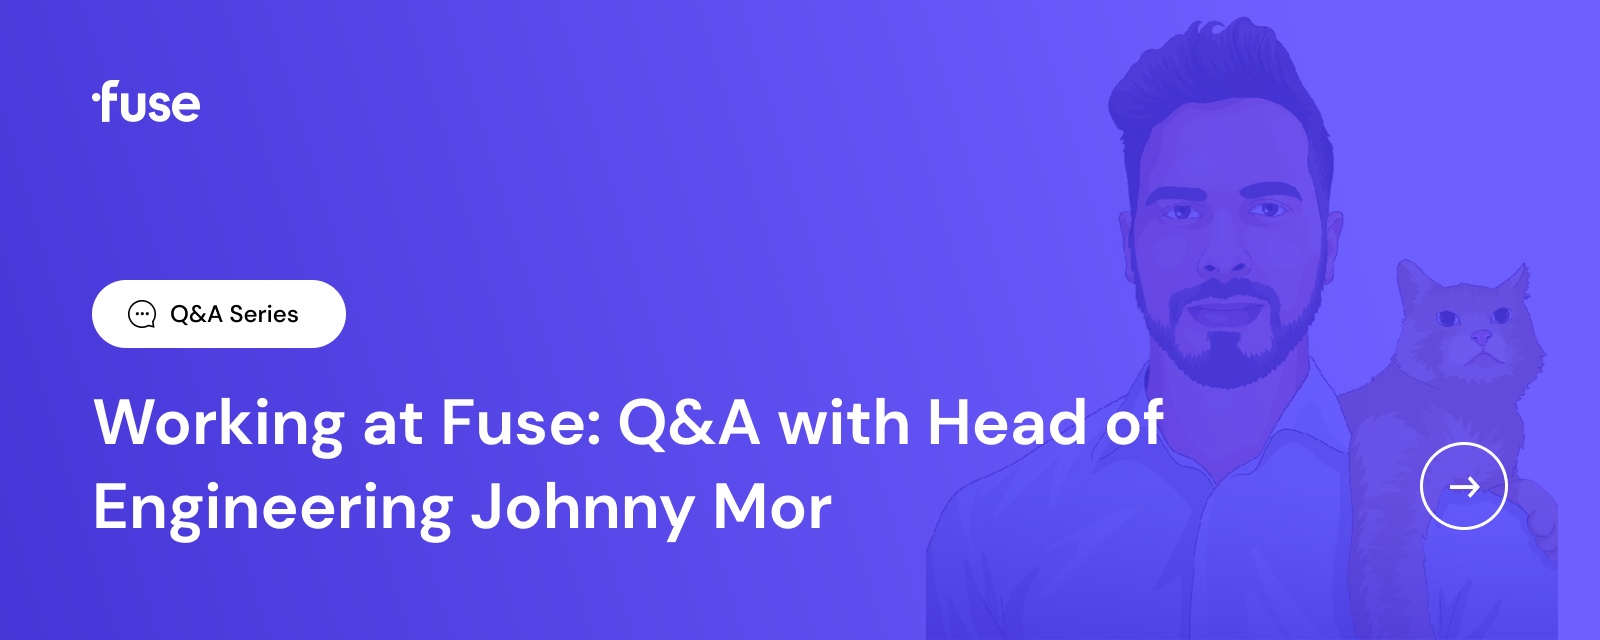 Related Read: Working at Fuse: Q&A with Head of Engineering Johnny Mor